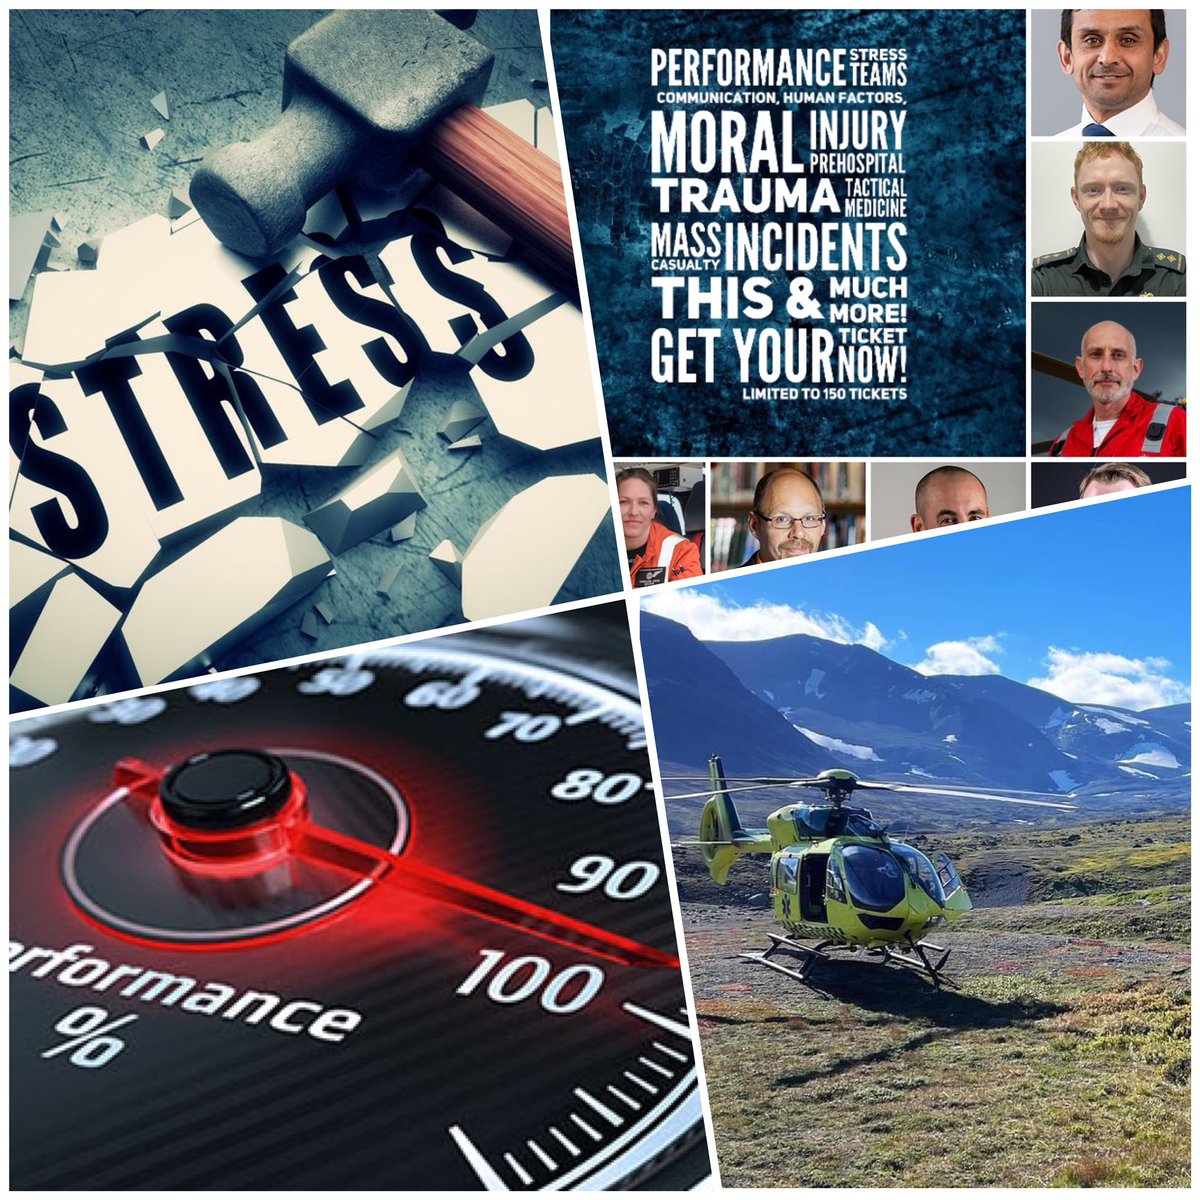 🧵➡️ Taking yourself and your team to the next level in October? #TacTrauma24 
Some of the awesome talks ⬇️⬇️⬇️
✅ A life in the UK Special Forces.  Performance, Stress and Mental Health - Pasha Munro

✅ Communication under pressure - @StephenHearns1 
#phem #foamed #TacMed